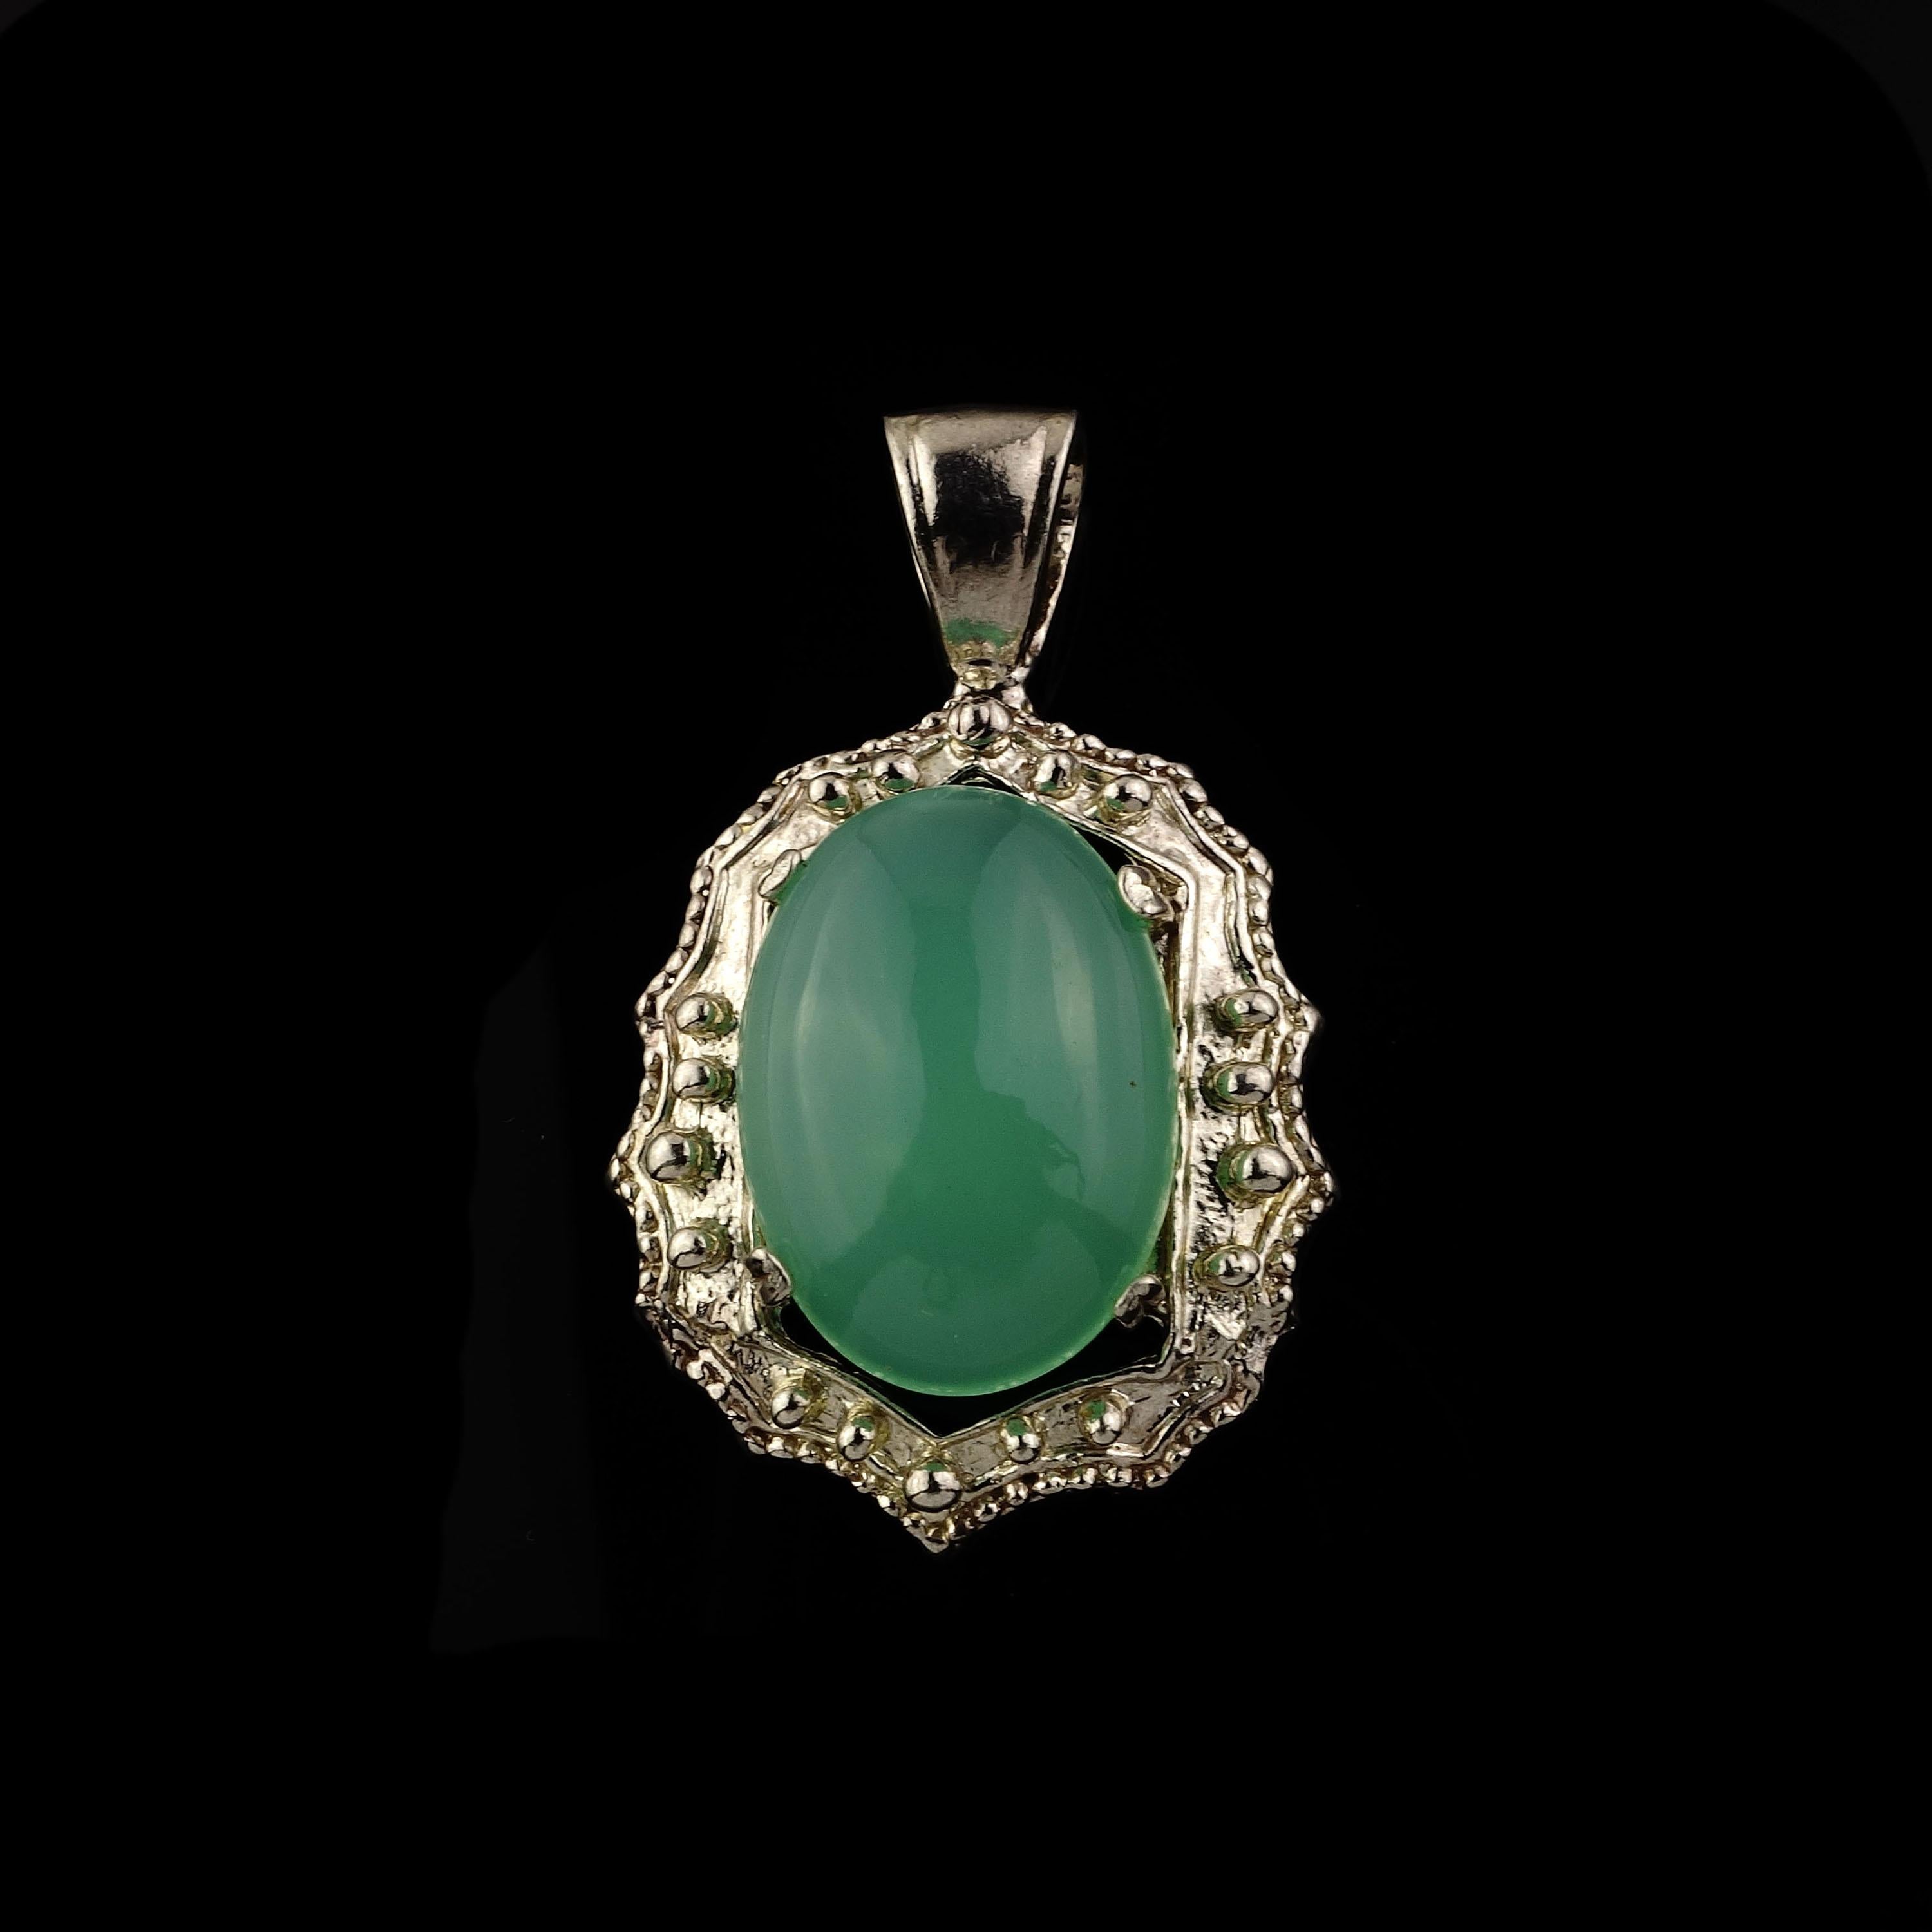 Artisan AJD Glowing Translucent Cabochon Chrysophrase in Sterling Silver Pendant For Sale